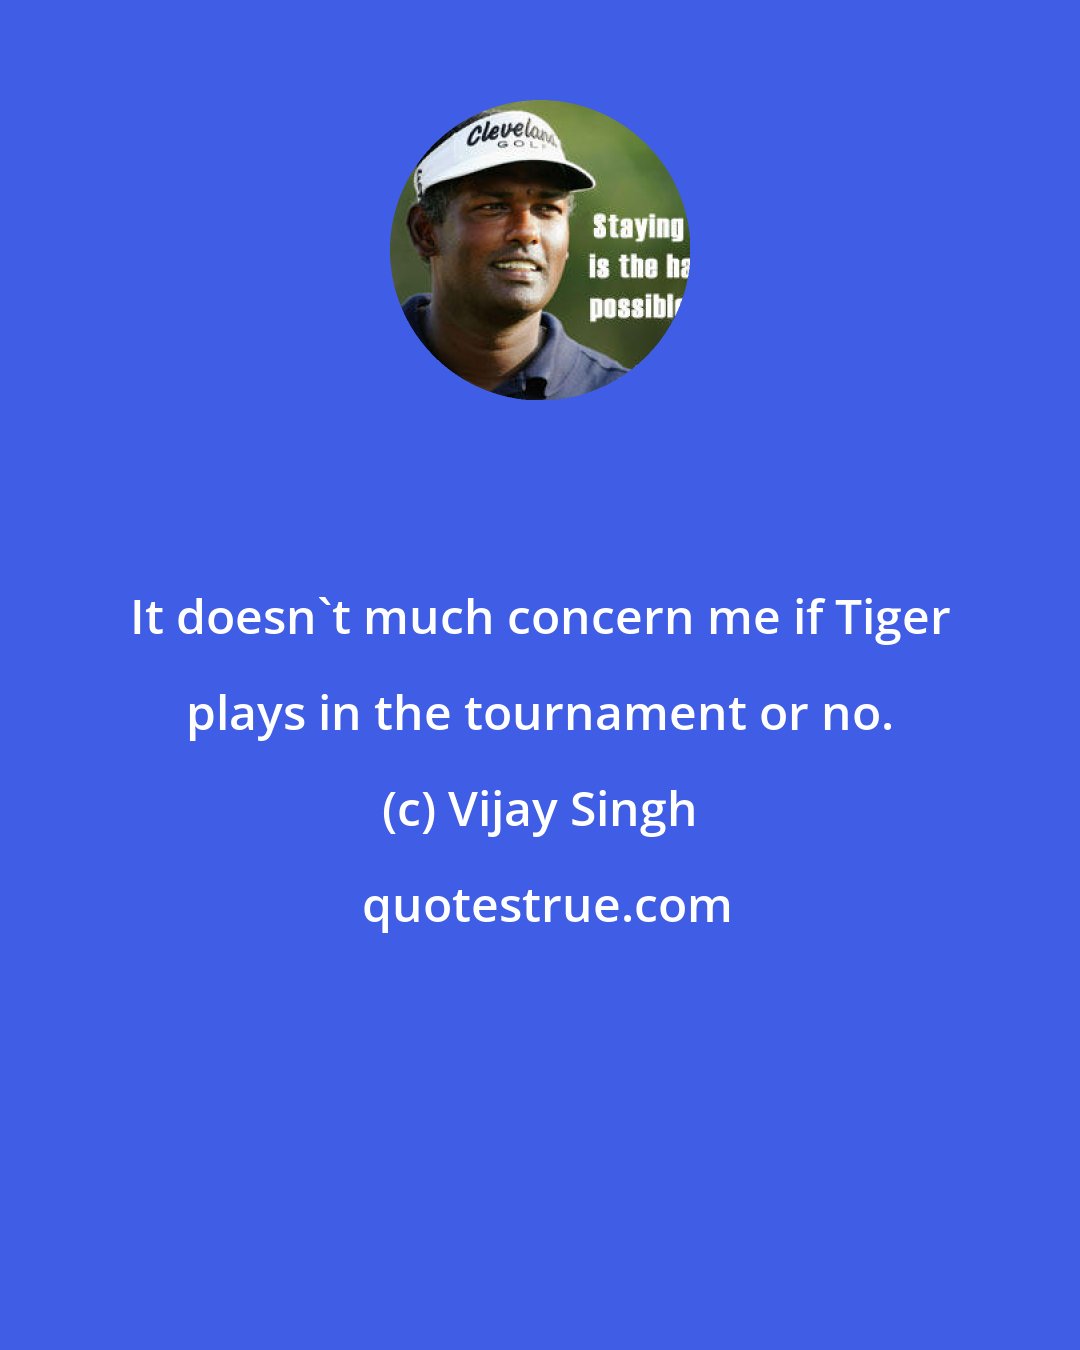 Vijay Singh: It doesn't much concern me if Tiger plays in the tournament or no.